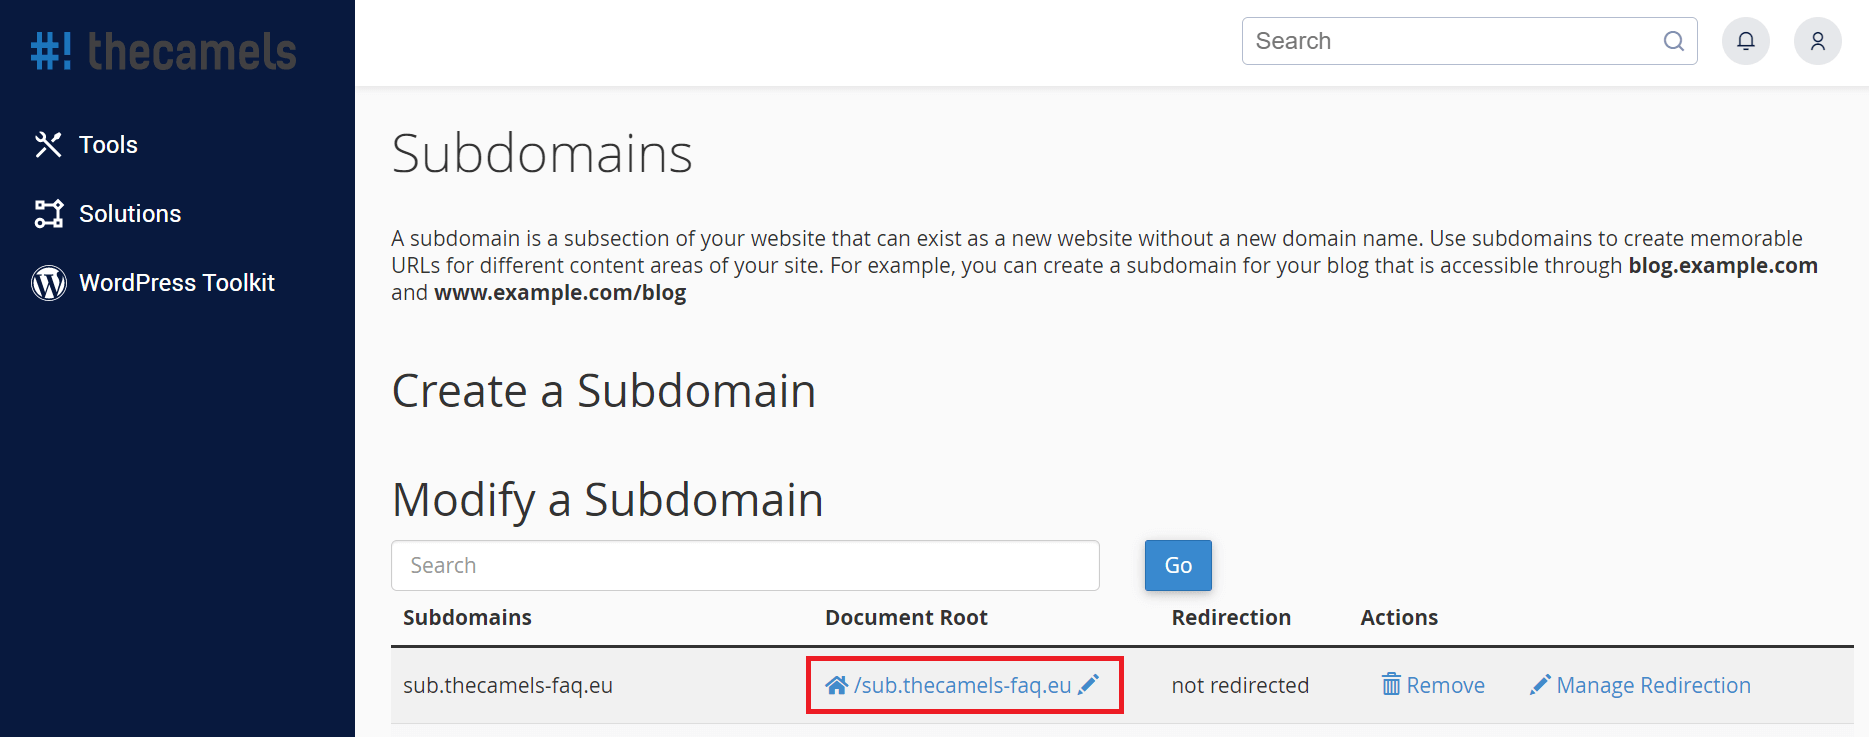 Changing root directory for subdomain - step 2